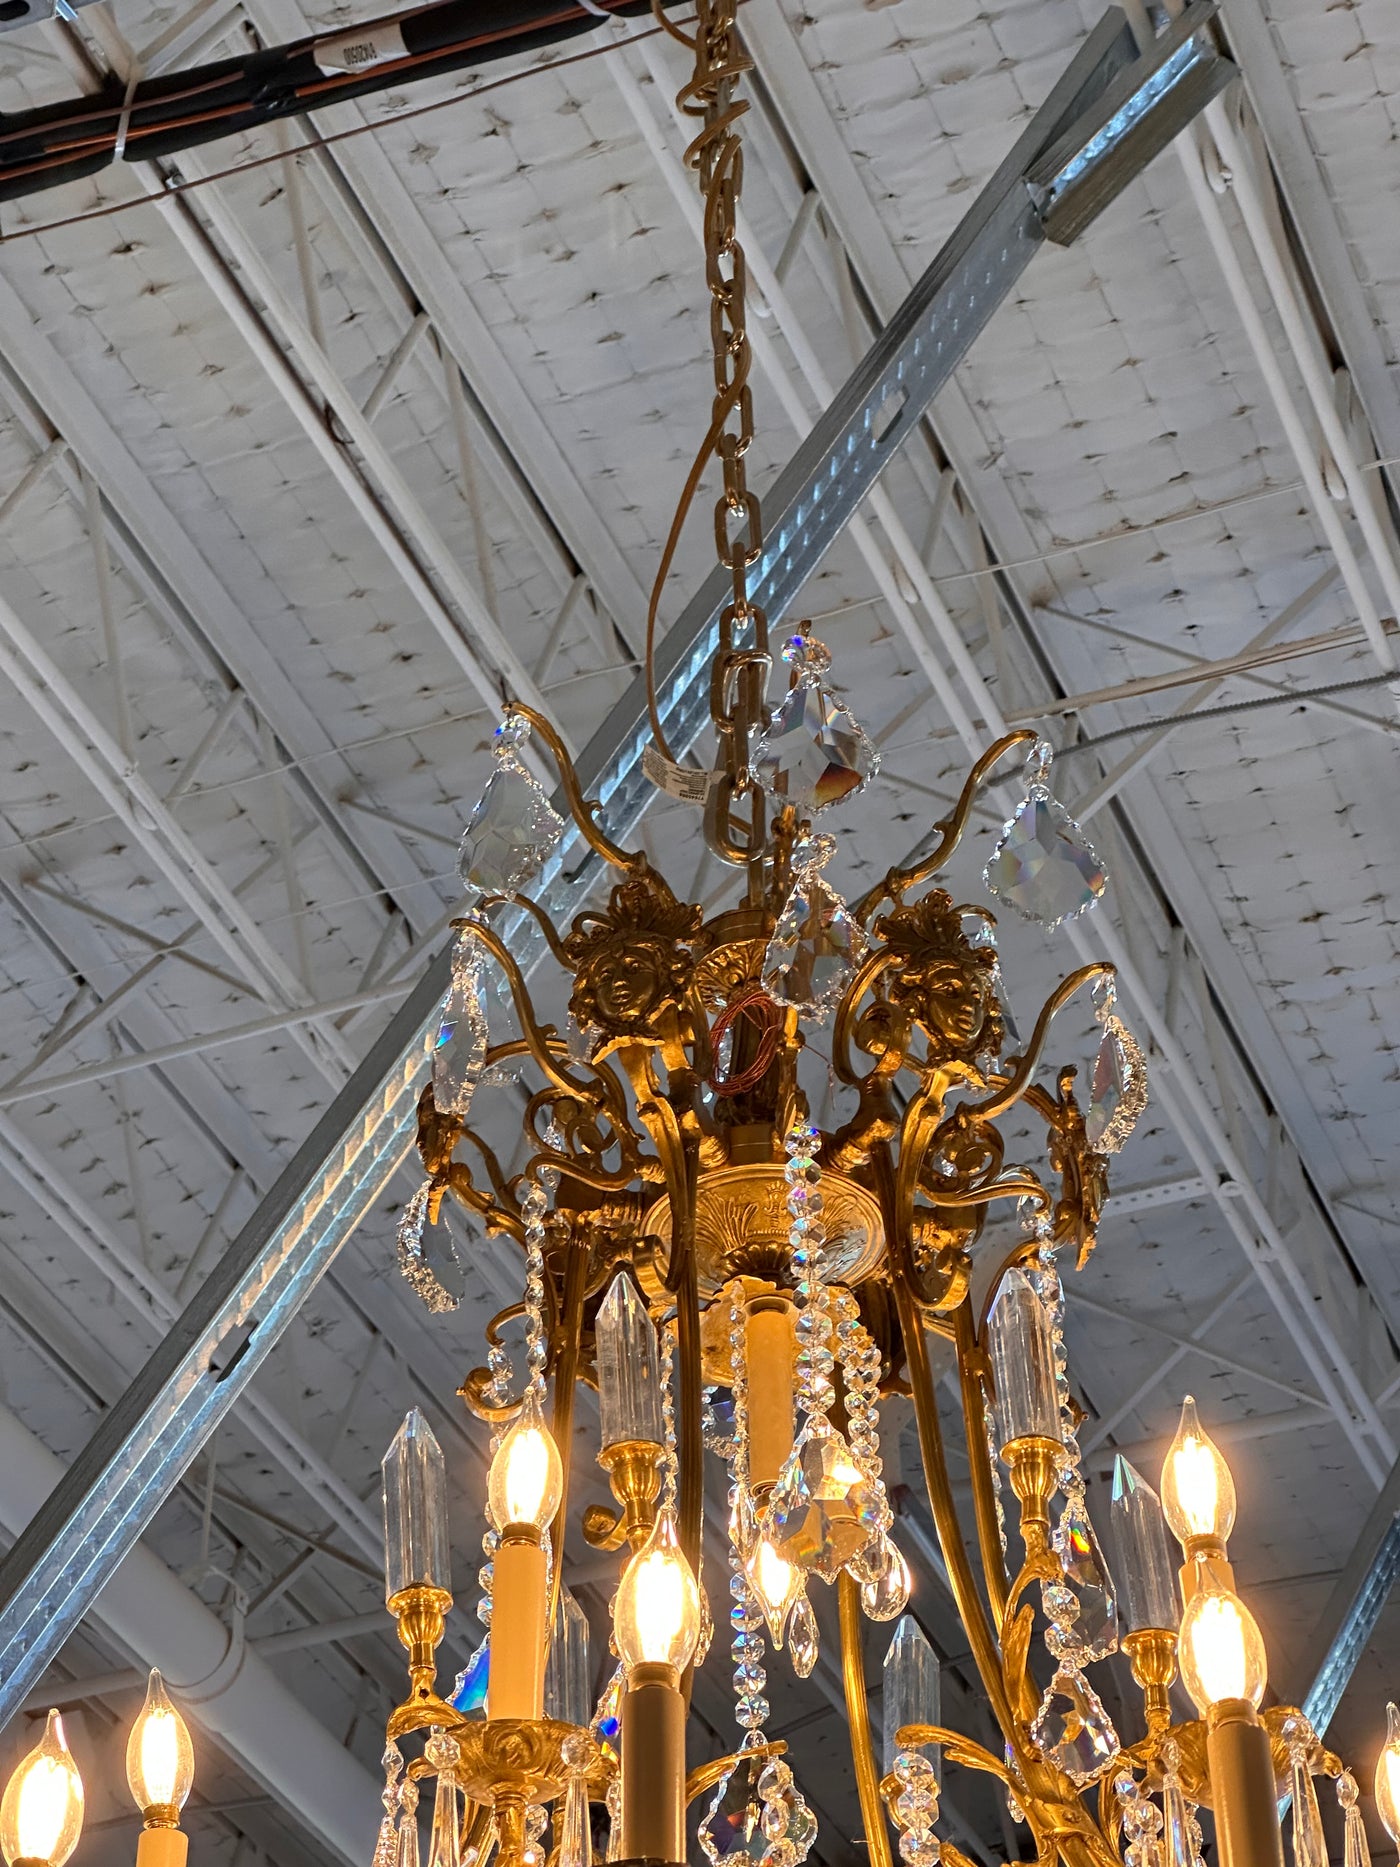 French Ornate Chandelier with Carving & Crystals